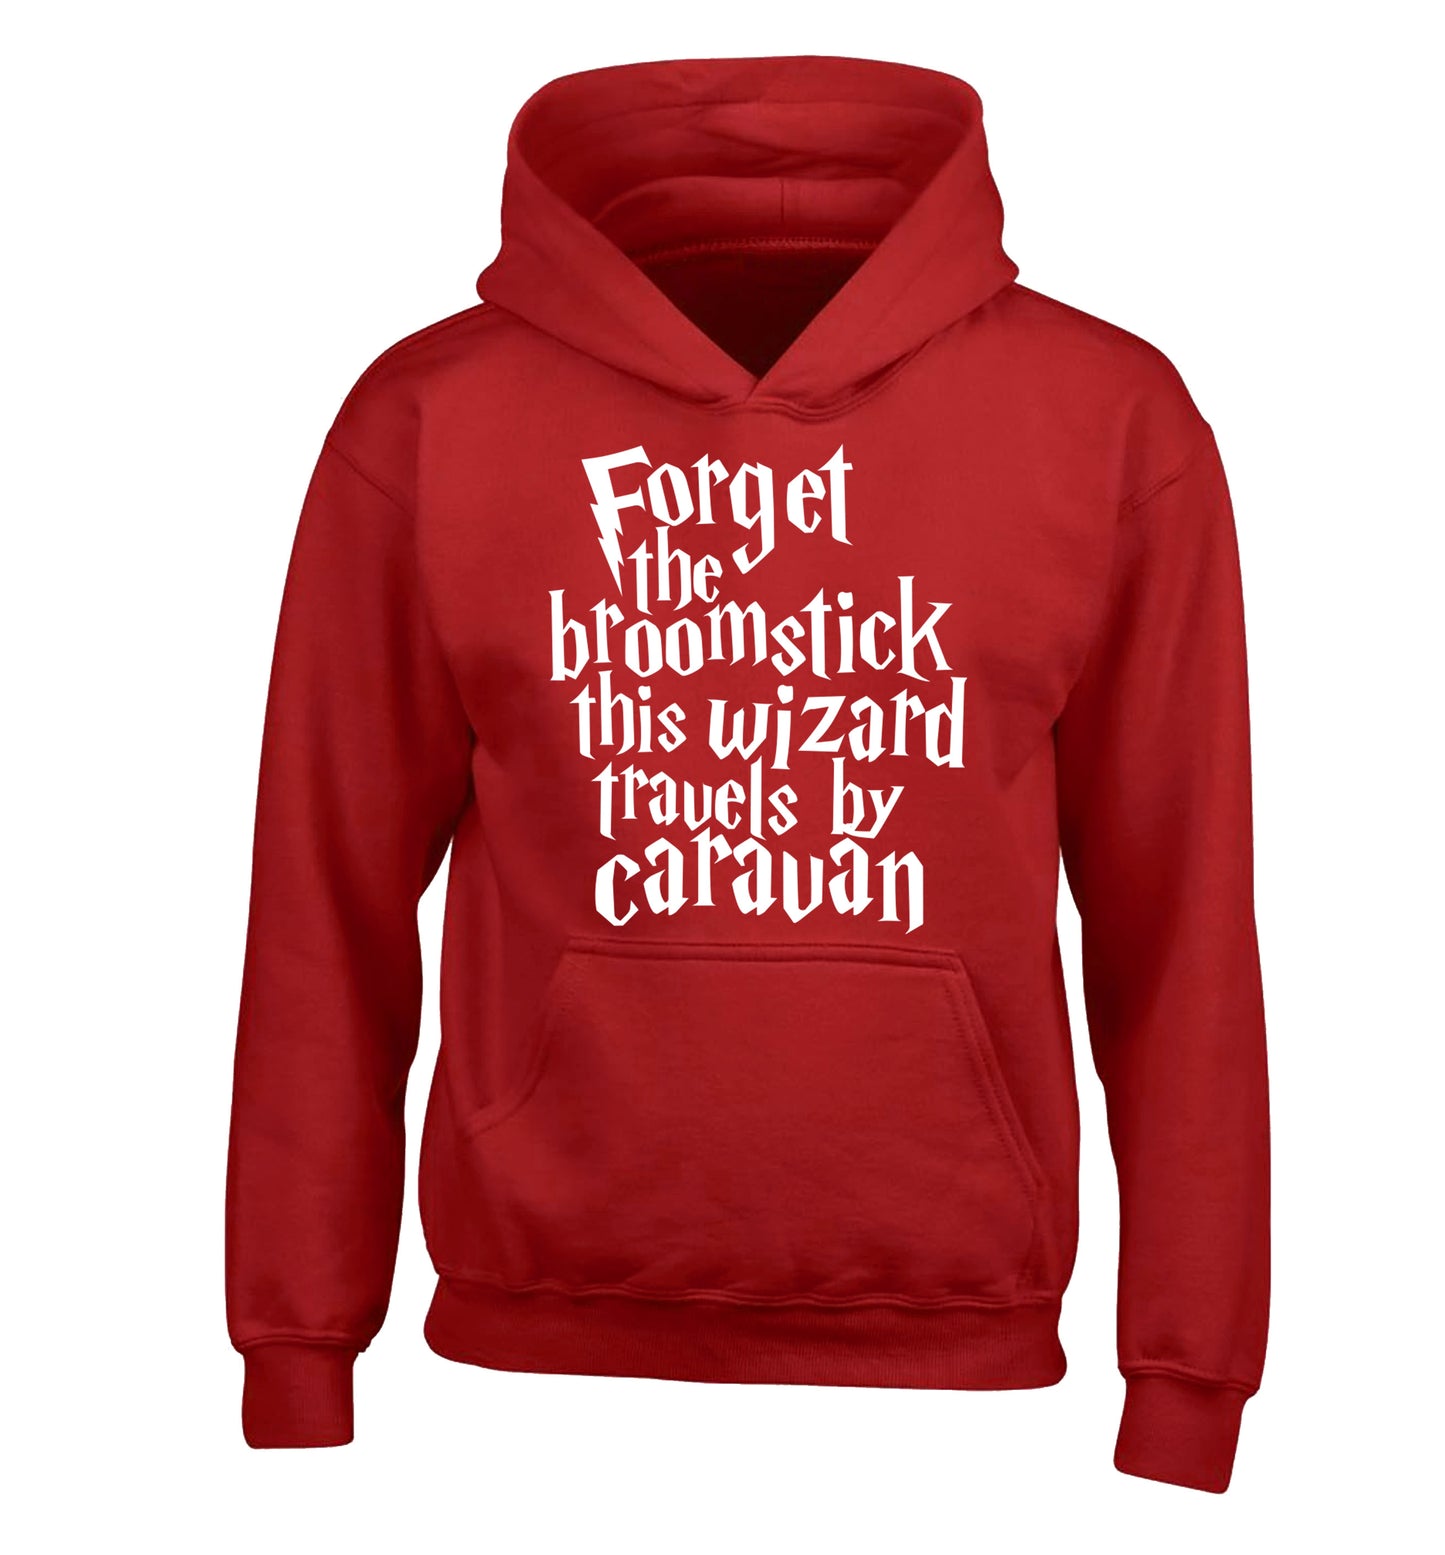 Forget the broomstick this wizard travels by caravan children's red hoodie 12-14 Years